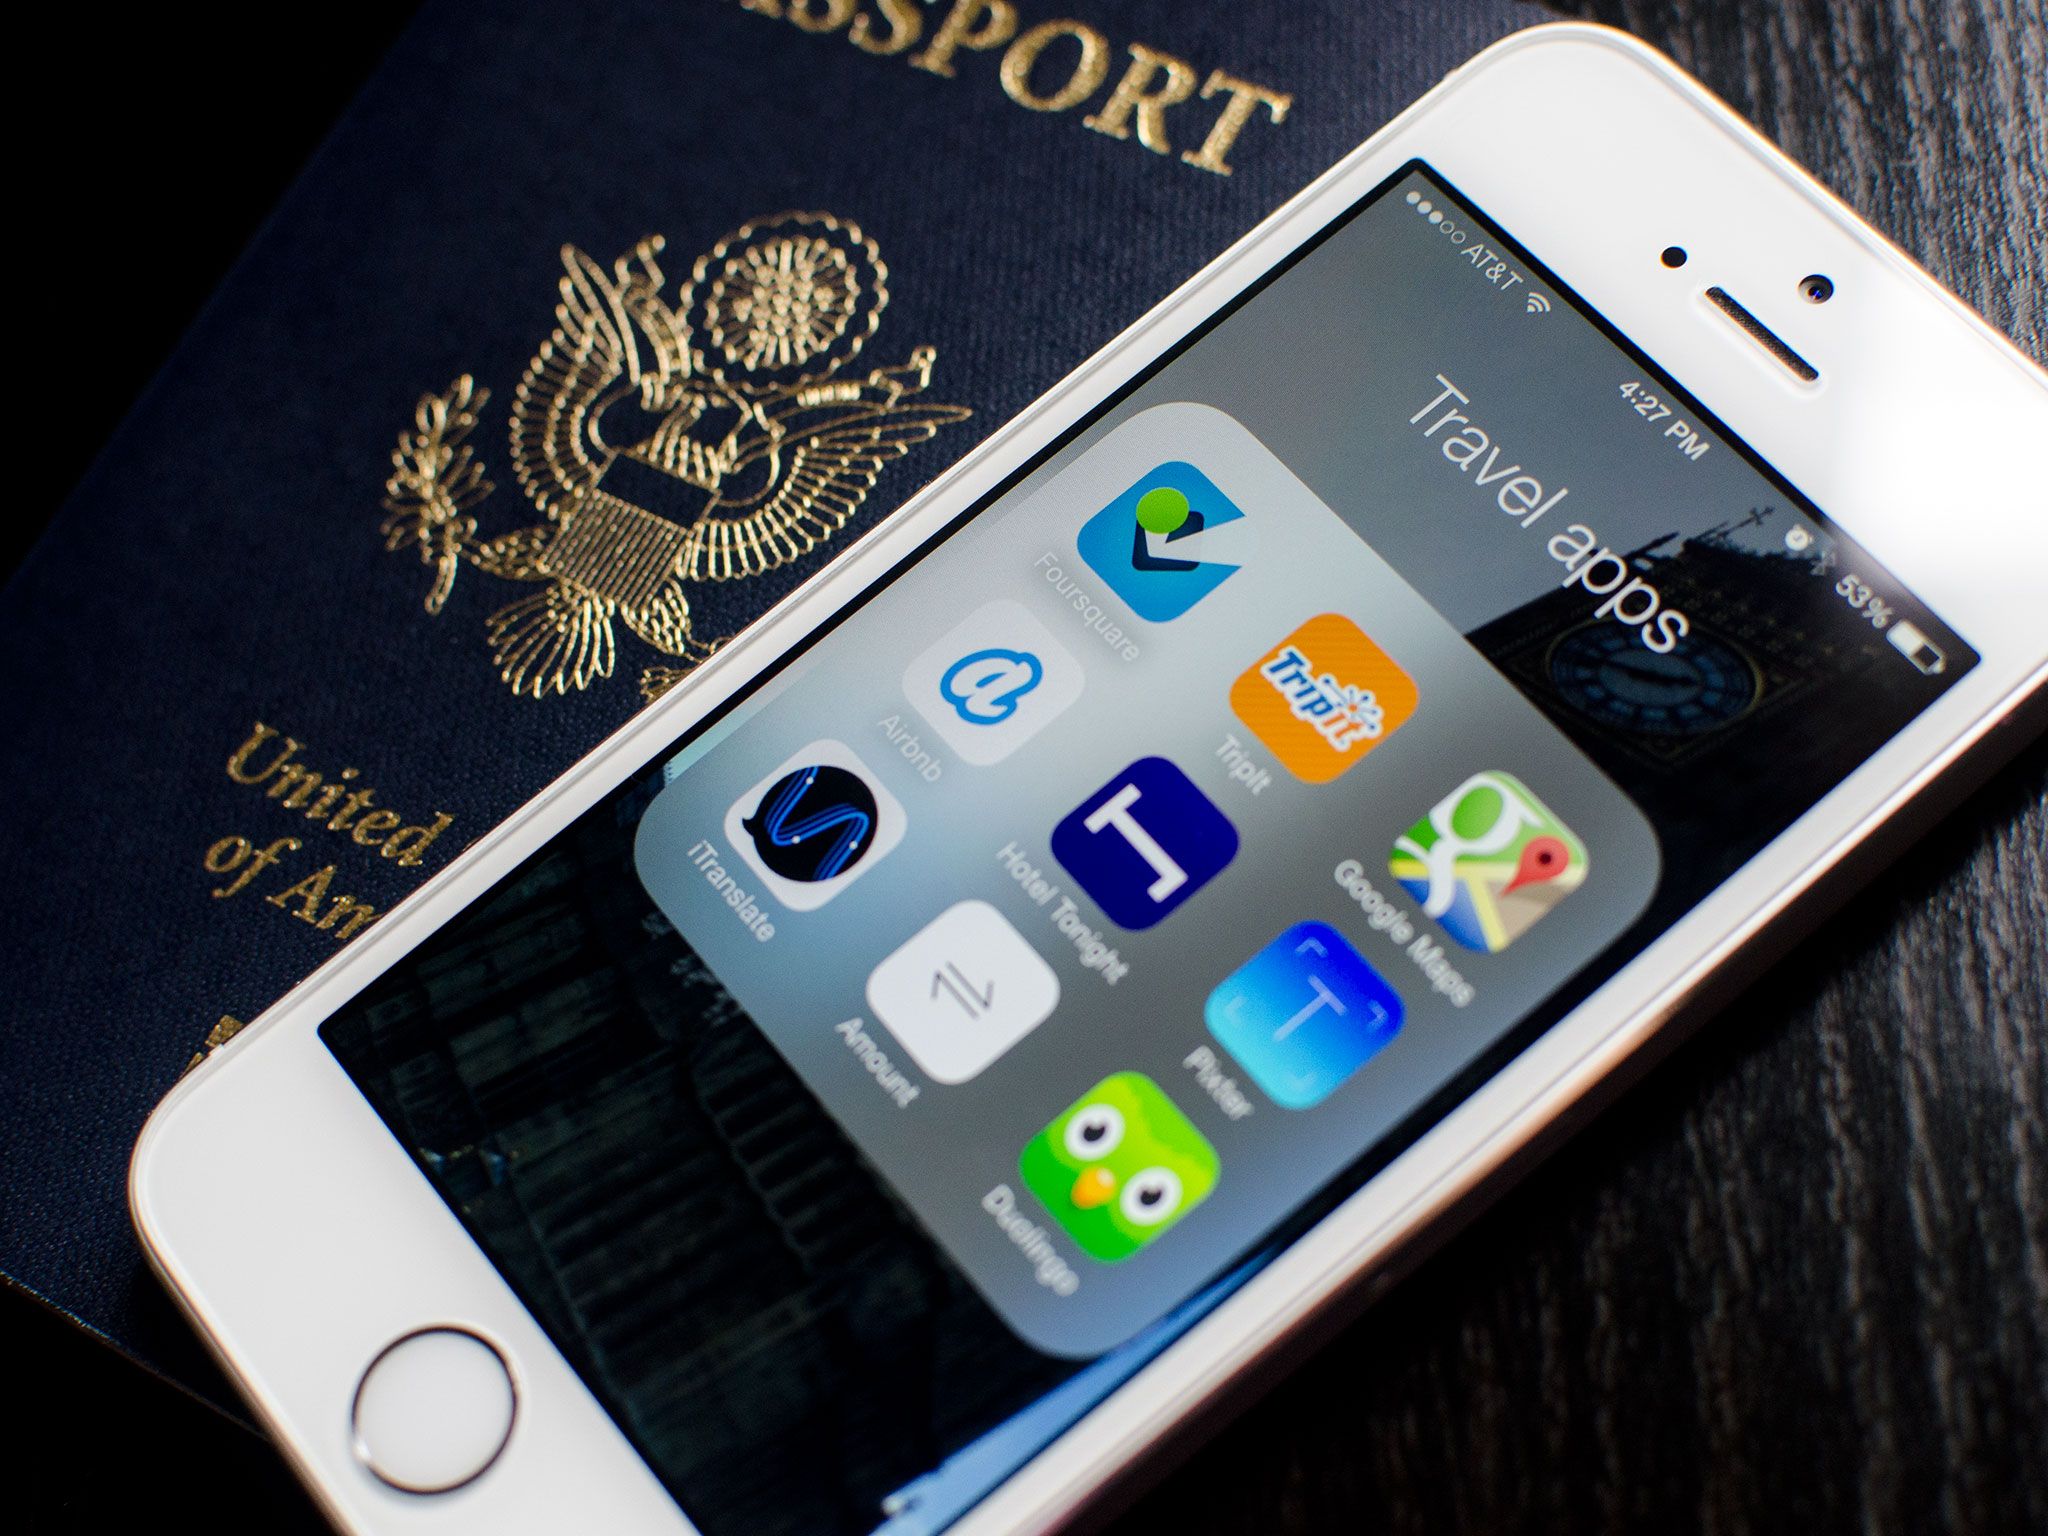 Best travel companion apps for iPhone: Foursquare, Airbnb, Duolingo, and more!